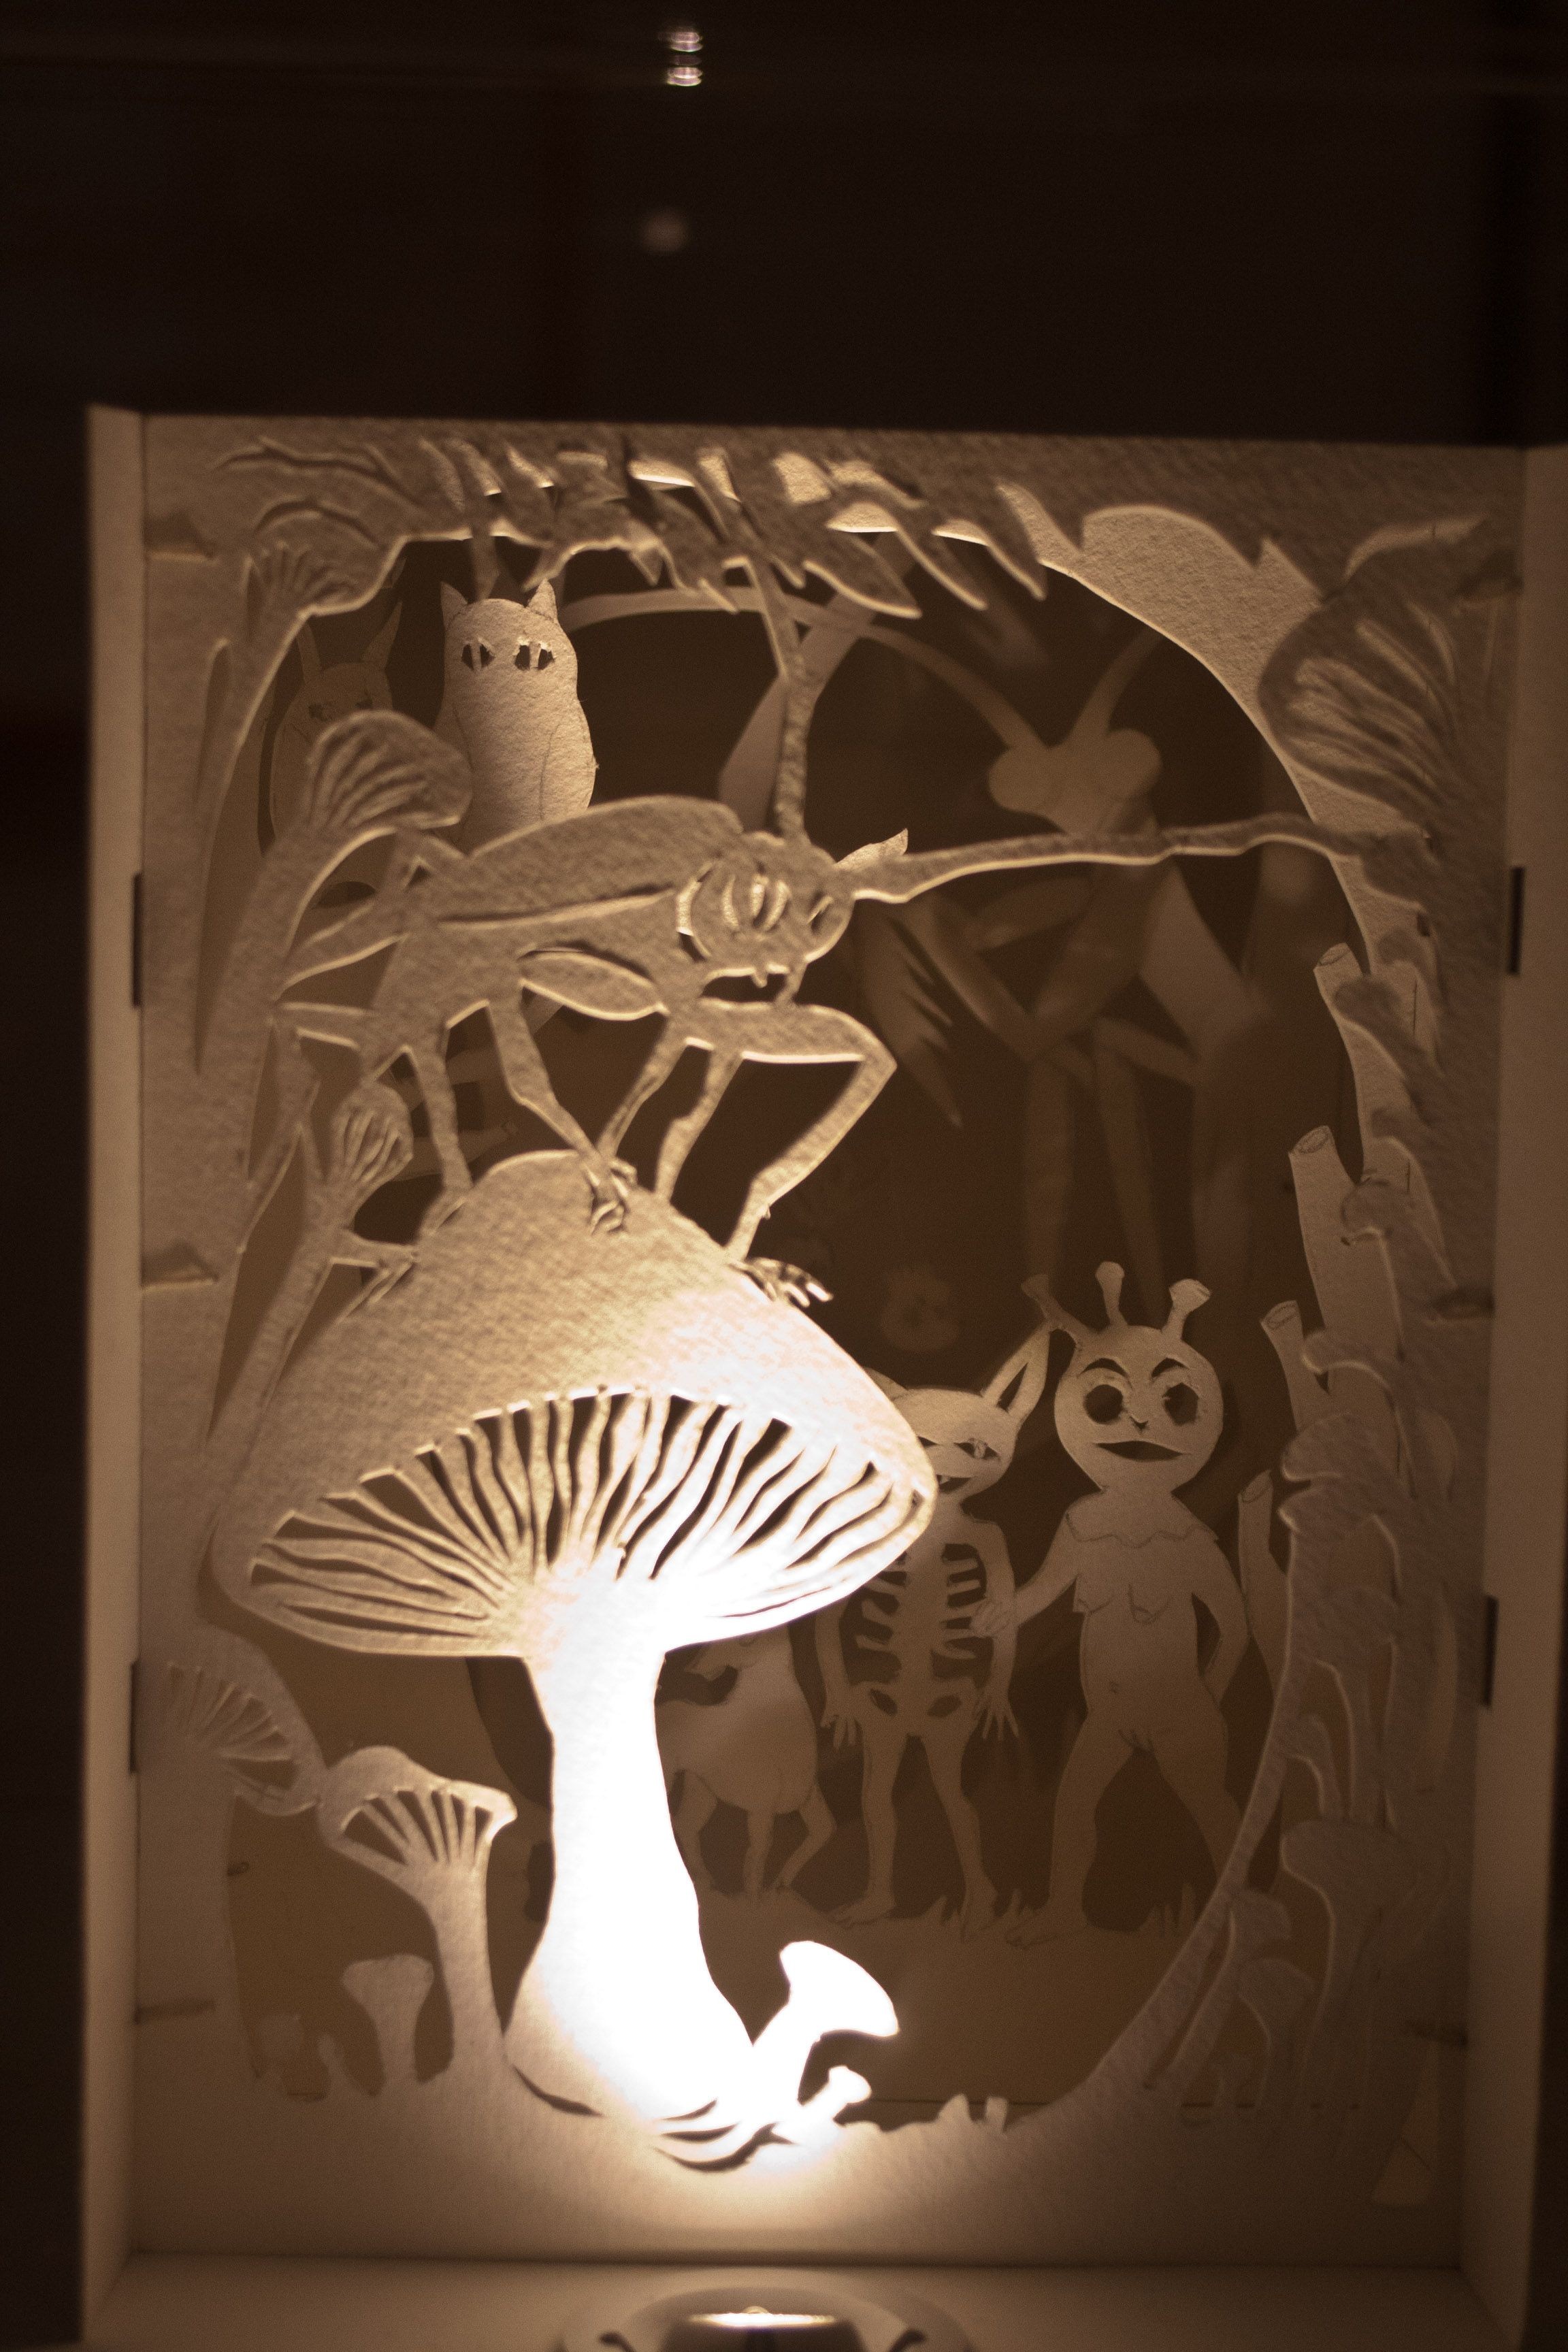 Papercraft Artists More Stunning Work From andrea Deszo Bining Paper and Light